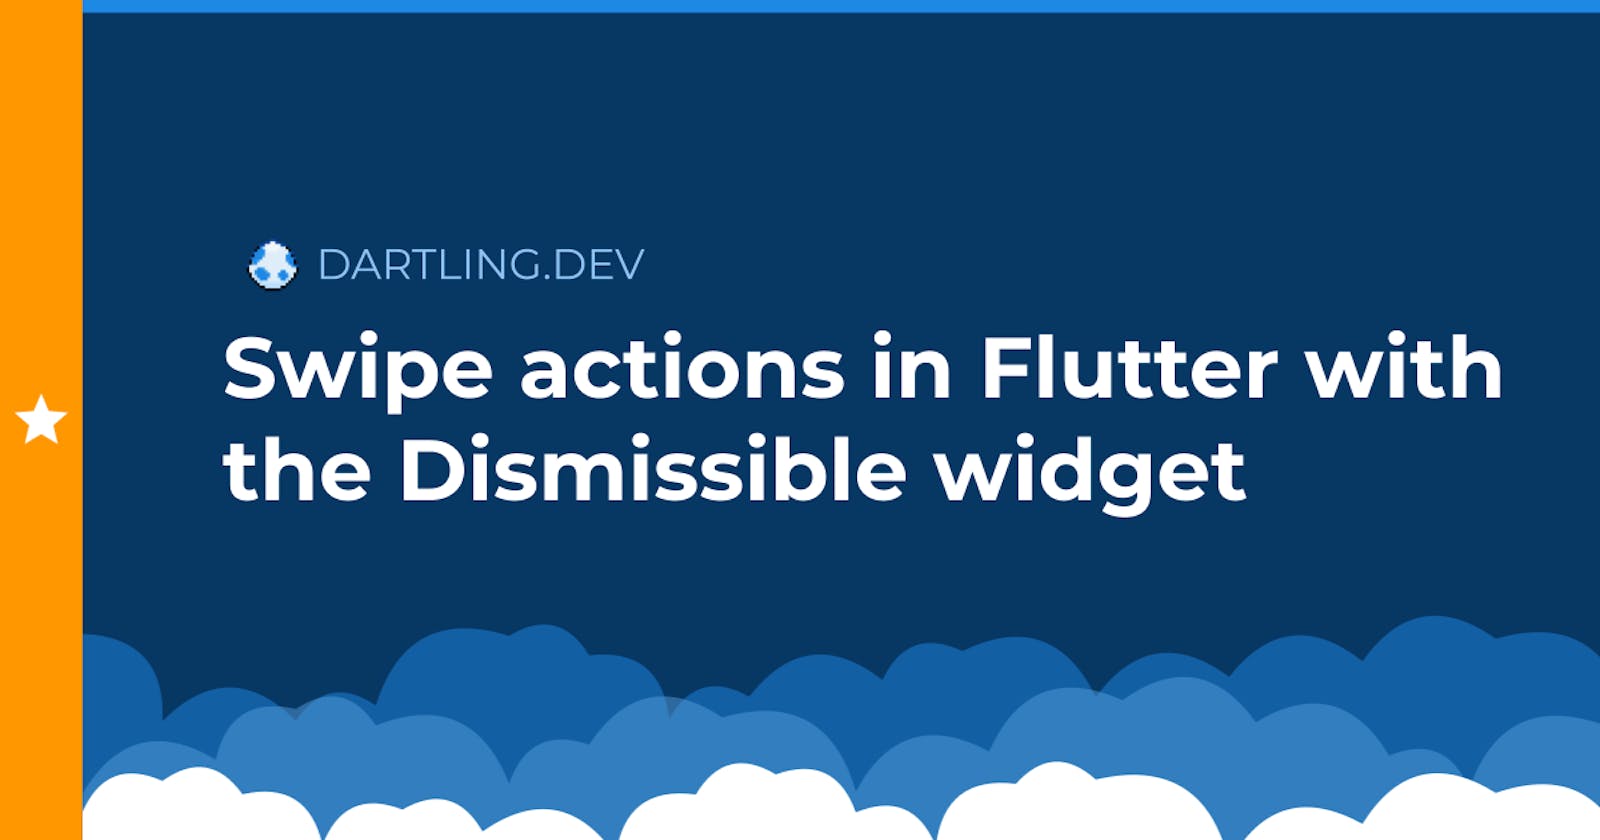 Swipe actions in Flutter with the Dismissible widget